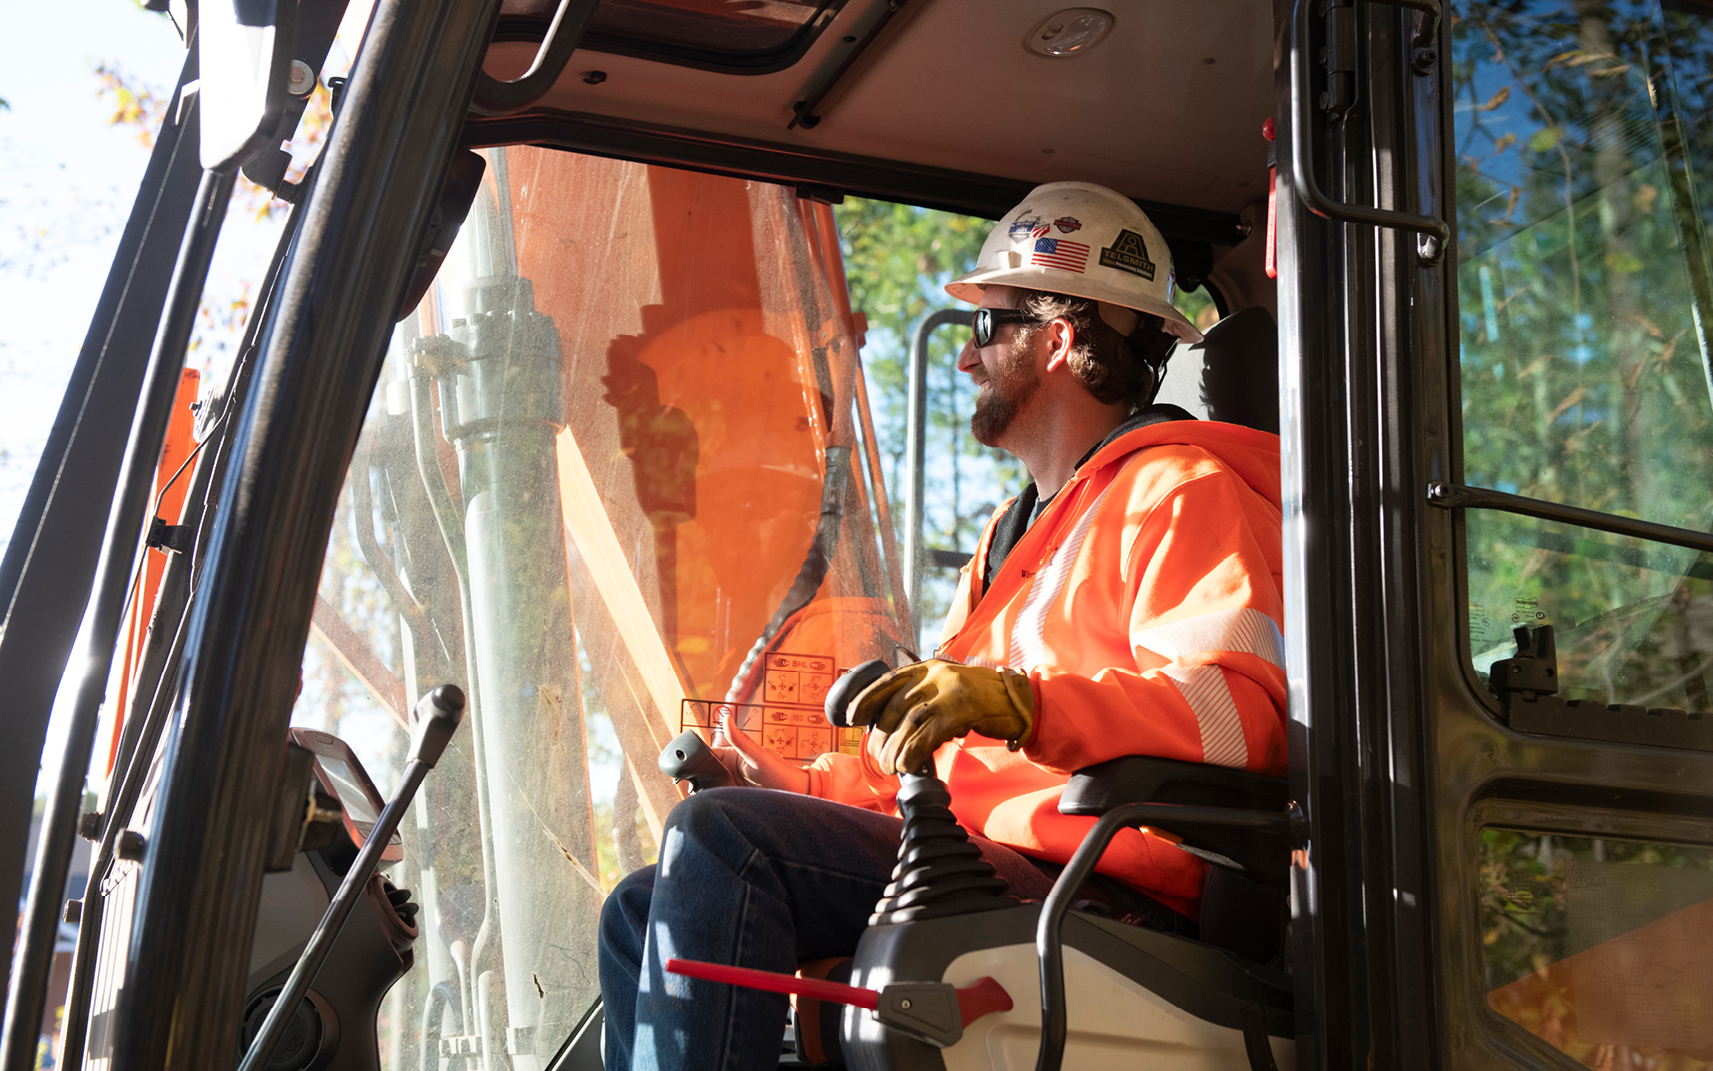 An excavator operator wearing PPE, including a hard hat and safety glasses.